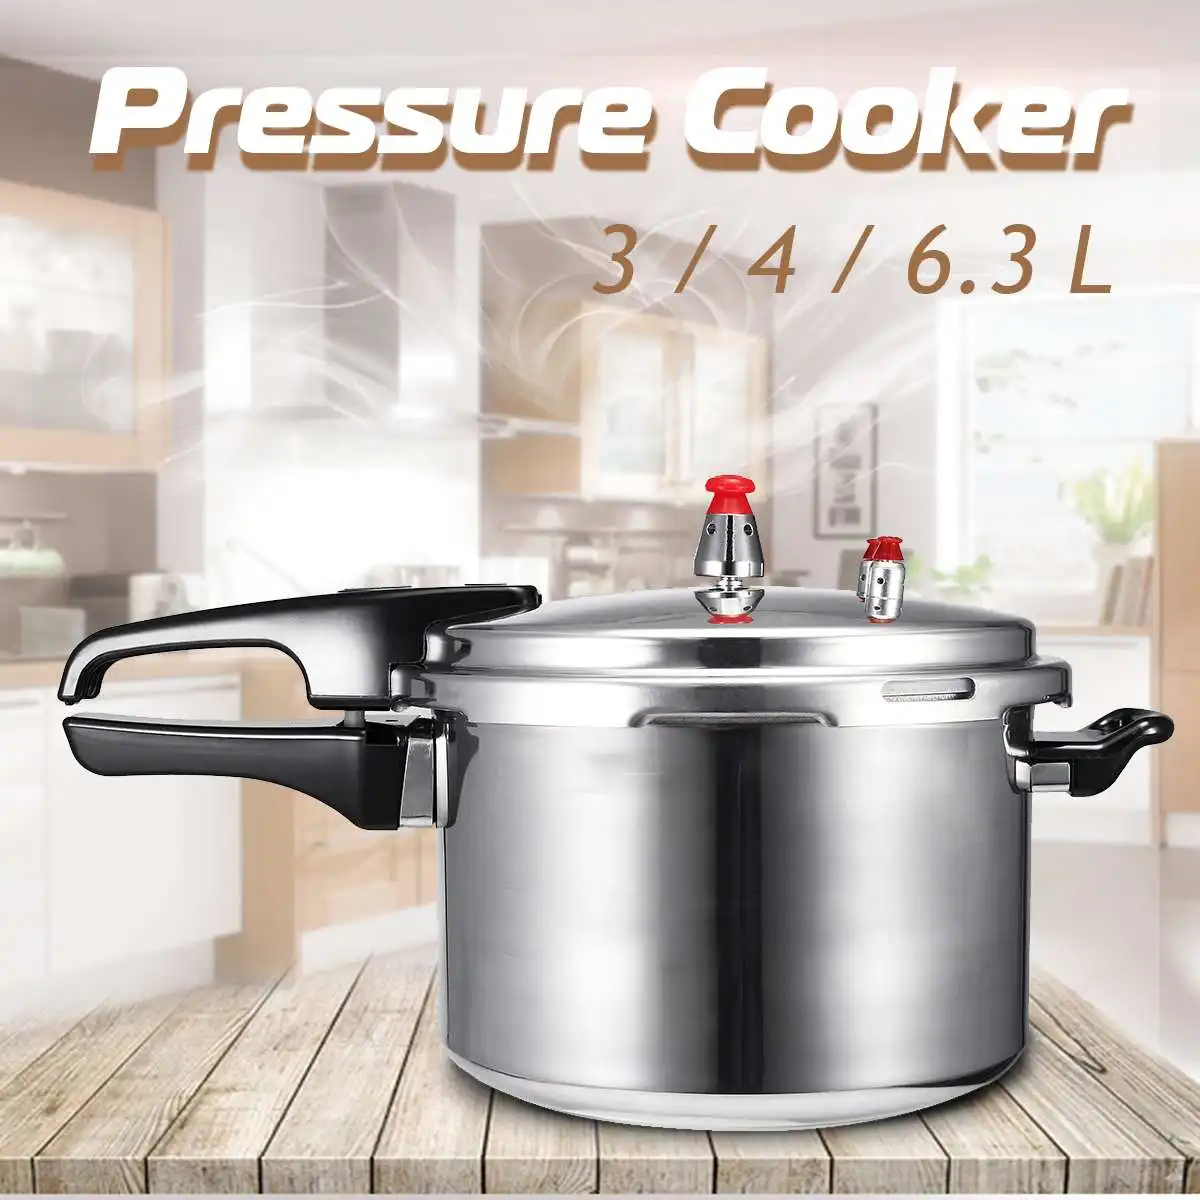 

18cm/20cm/22cm Kitchen Pressure Cooker Electric Stove Gas Stove Energy-saving Safety Cooking Utensils Aluminum Alloy